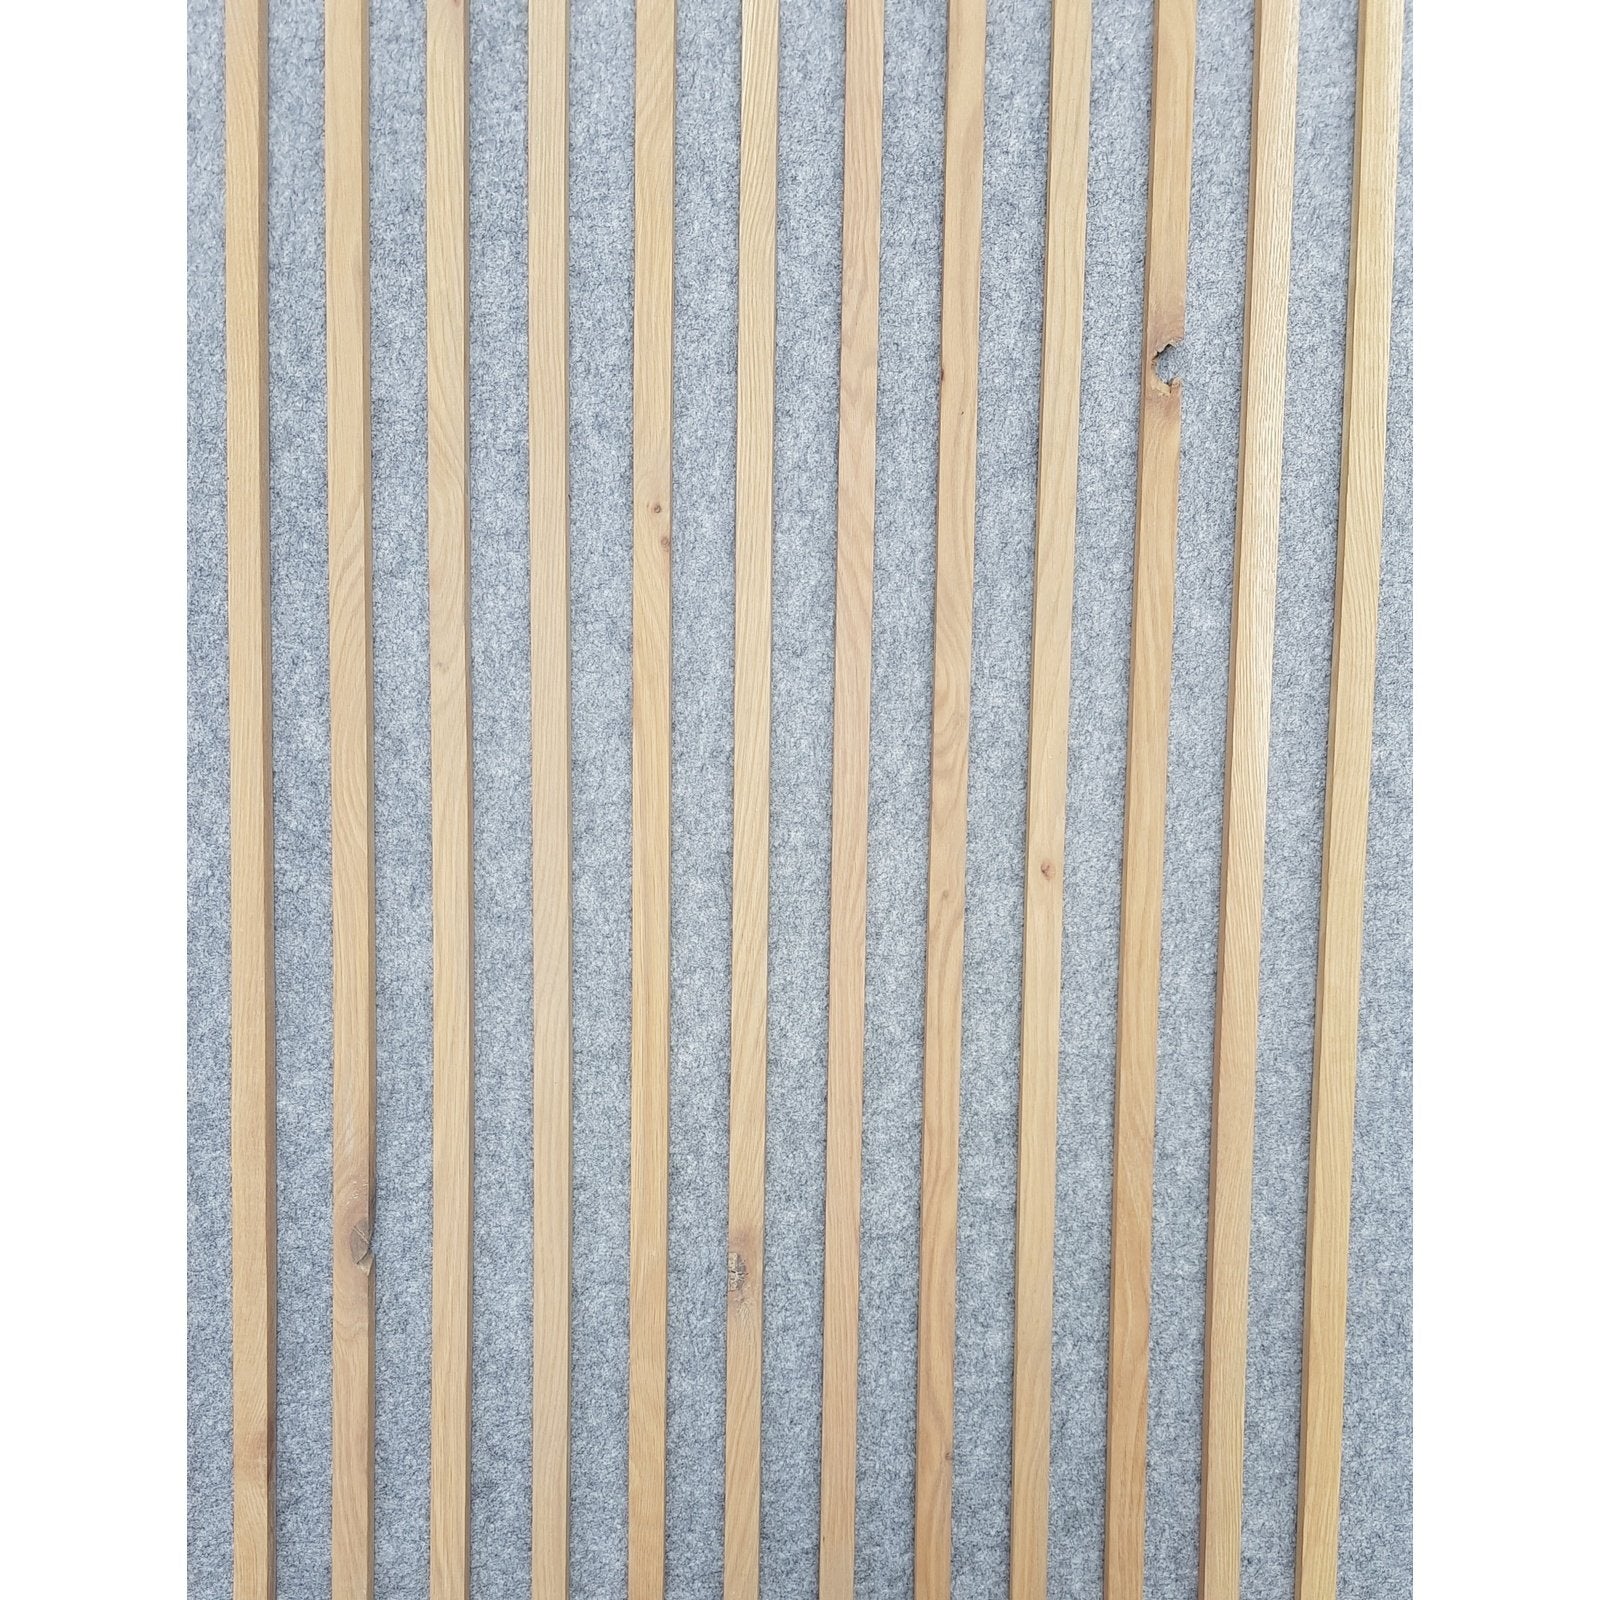 Acoustic slat wall panel made with white oak and light grey acoustic board